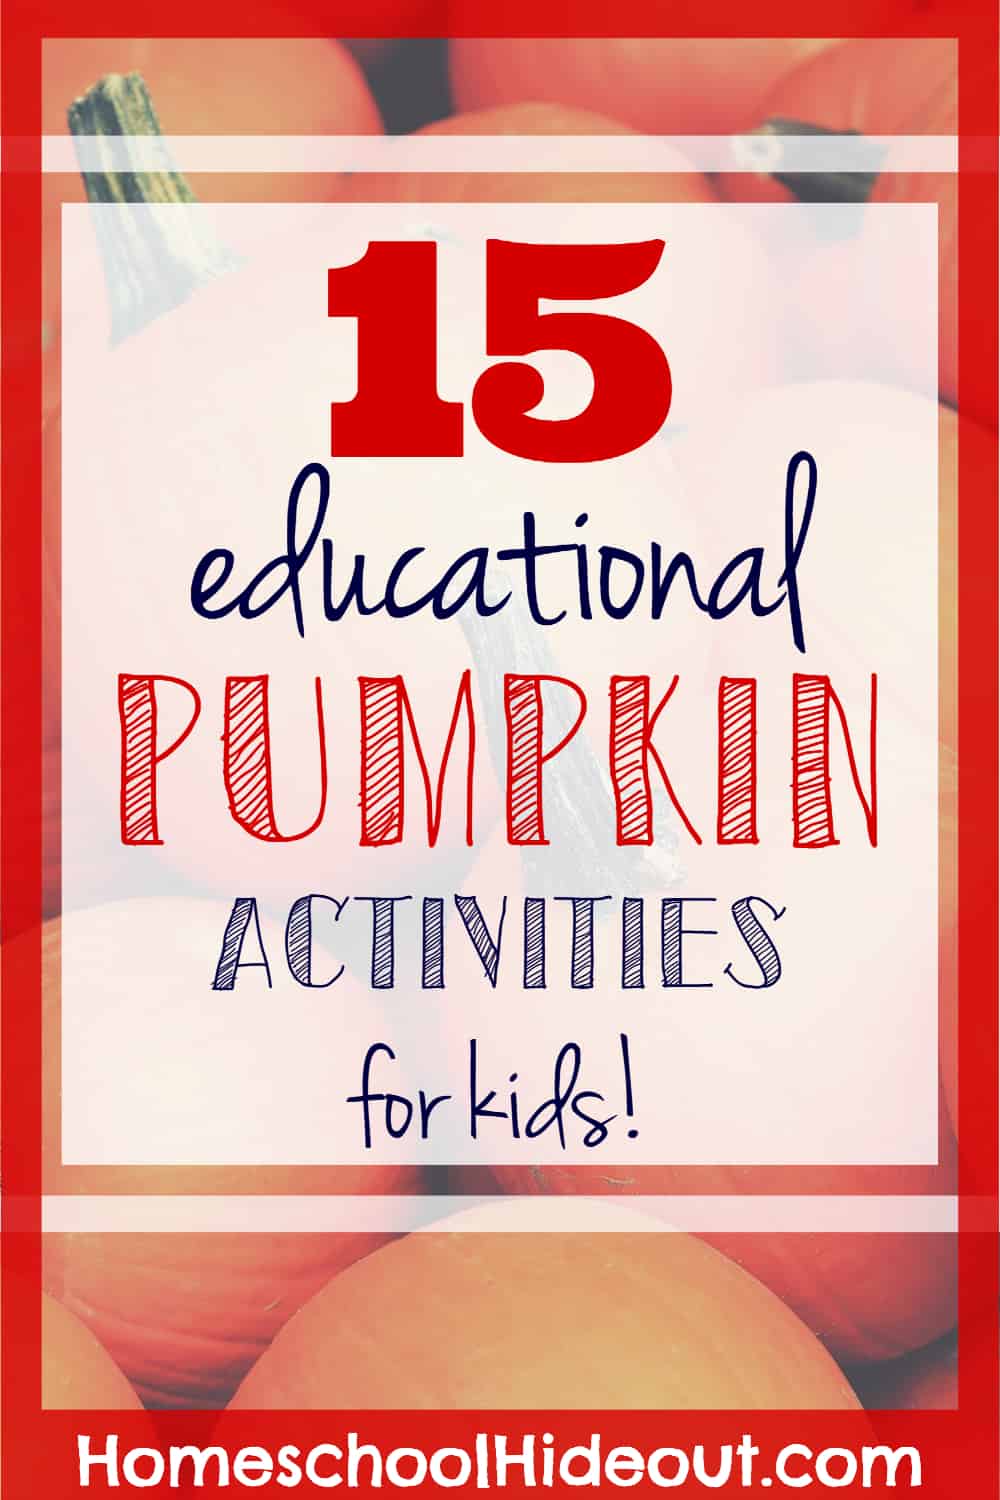 Easy and educational pumpkin activities that kids of all ages will LOVE!